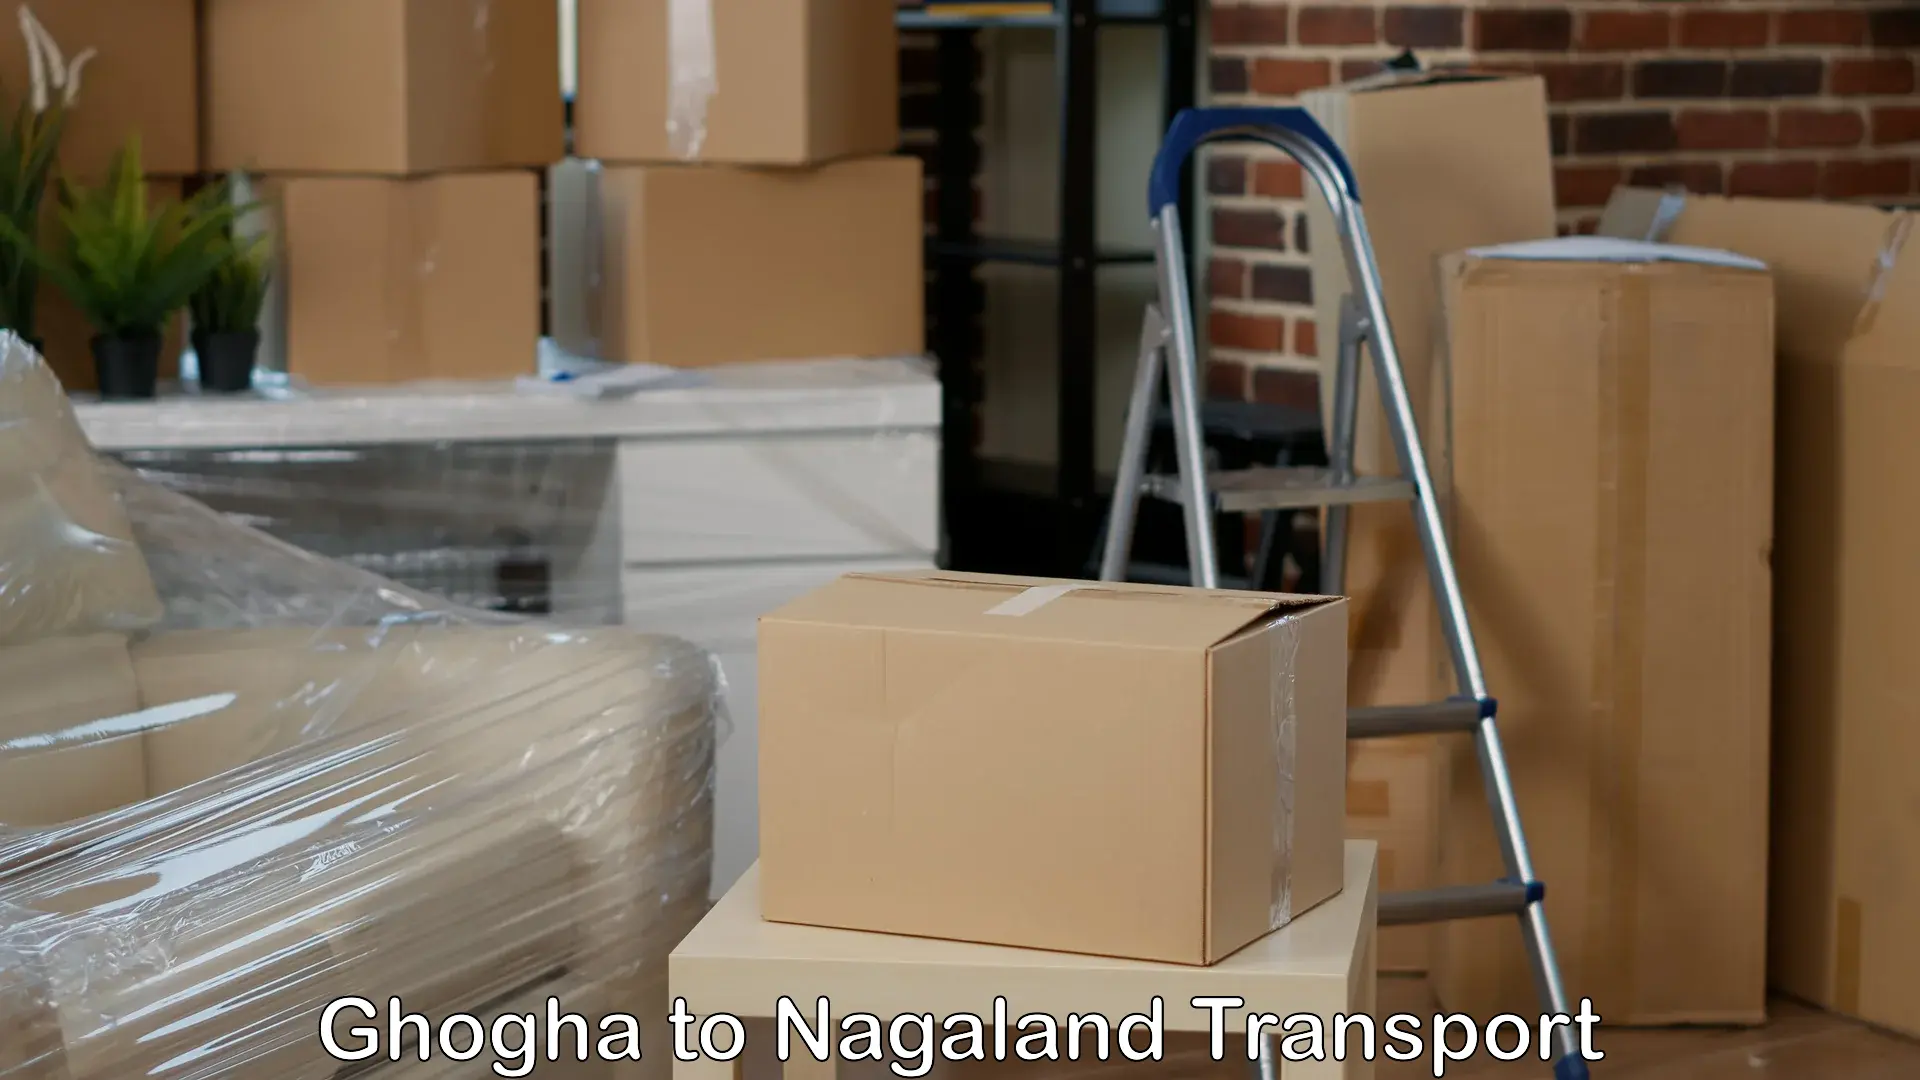 Daily parcel service transport Ghogha to Nagaland